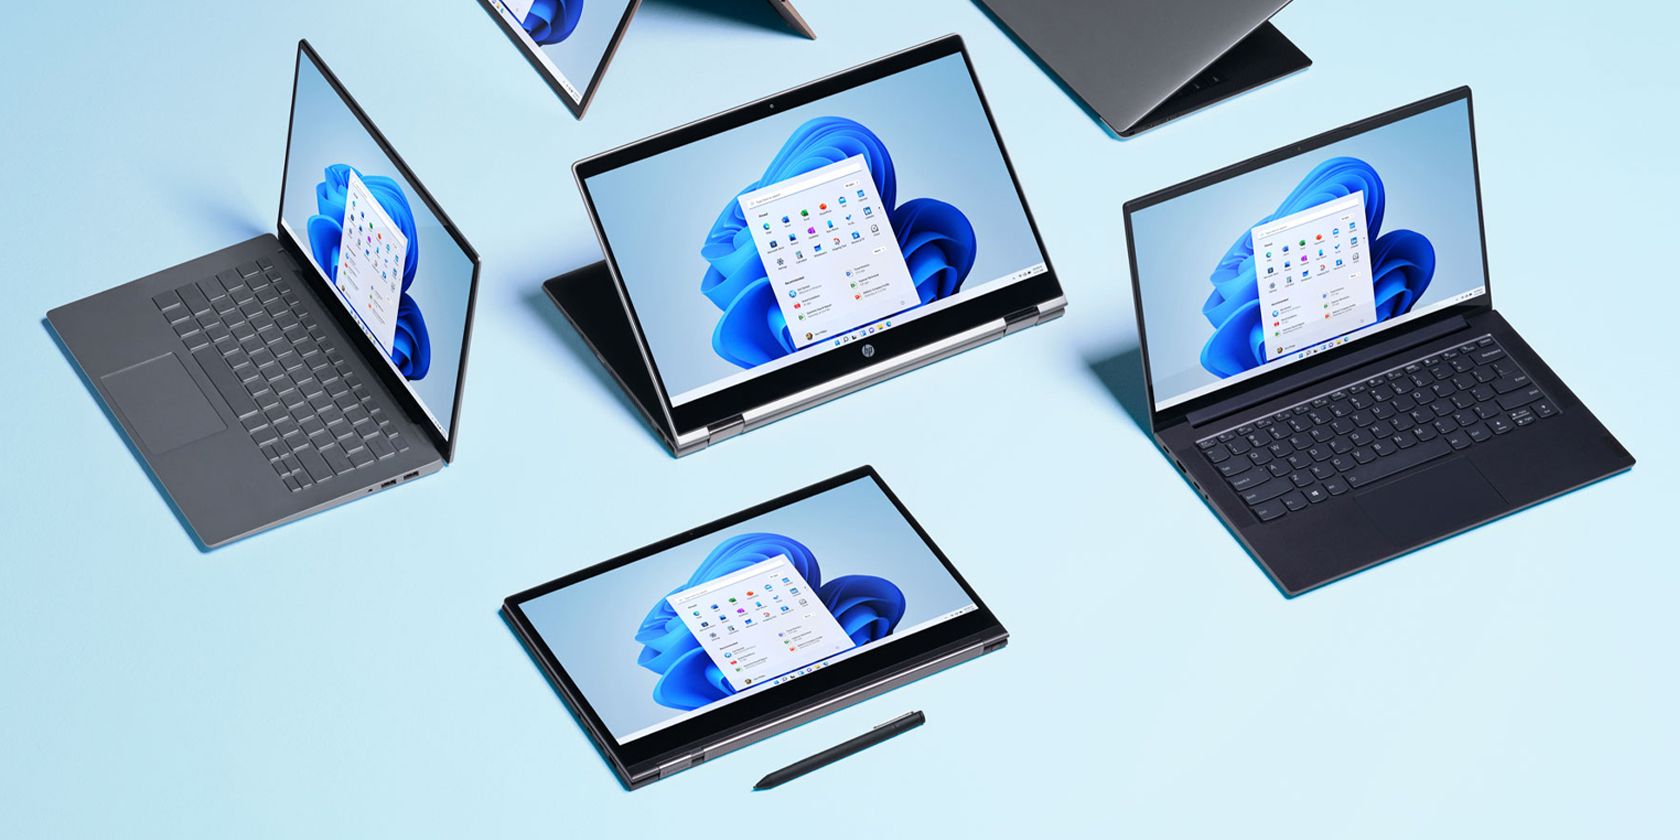 Windows 11 on various devices